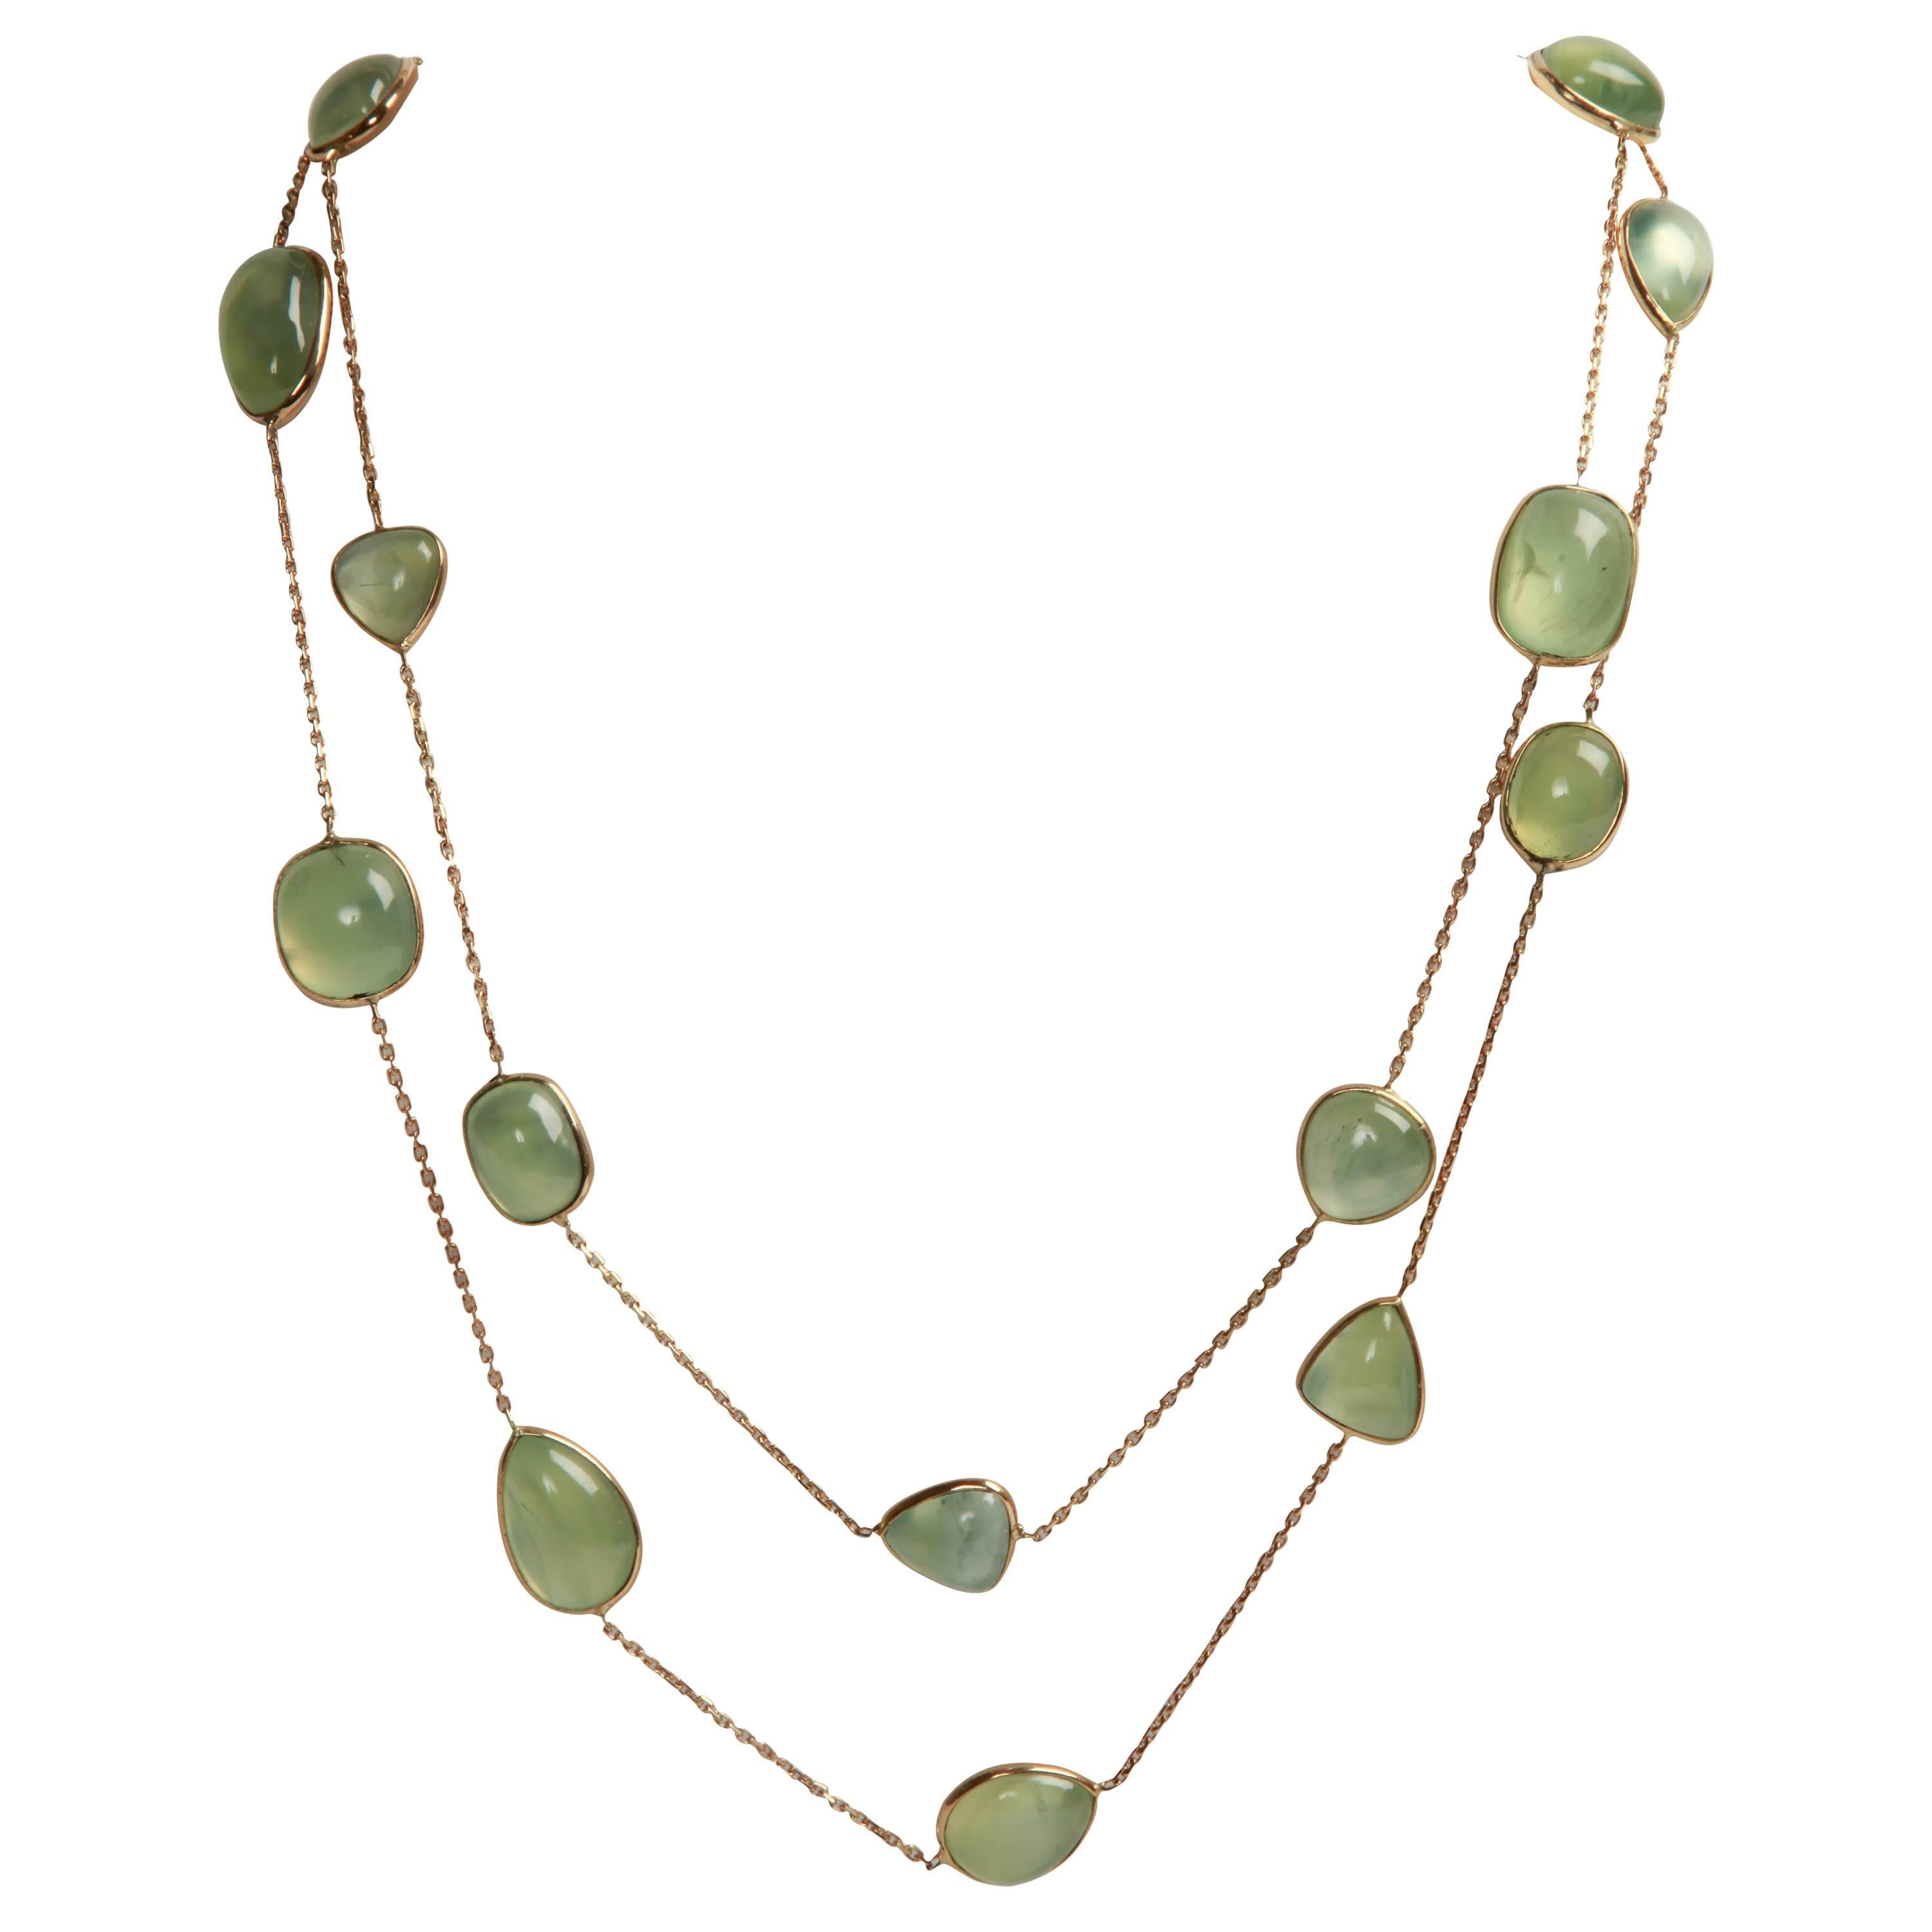  Prehnite Cabochons  Long Necklace by Marion Jeantet